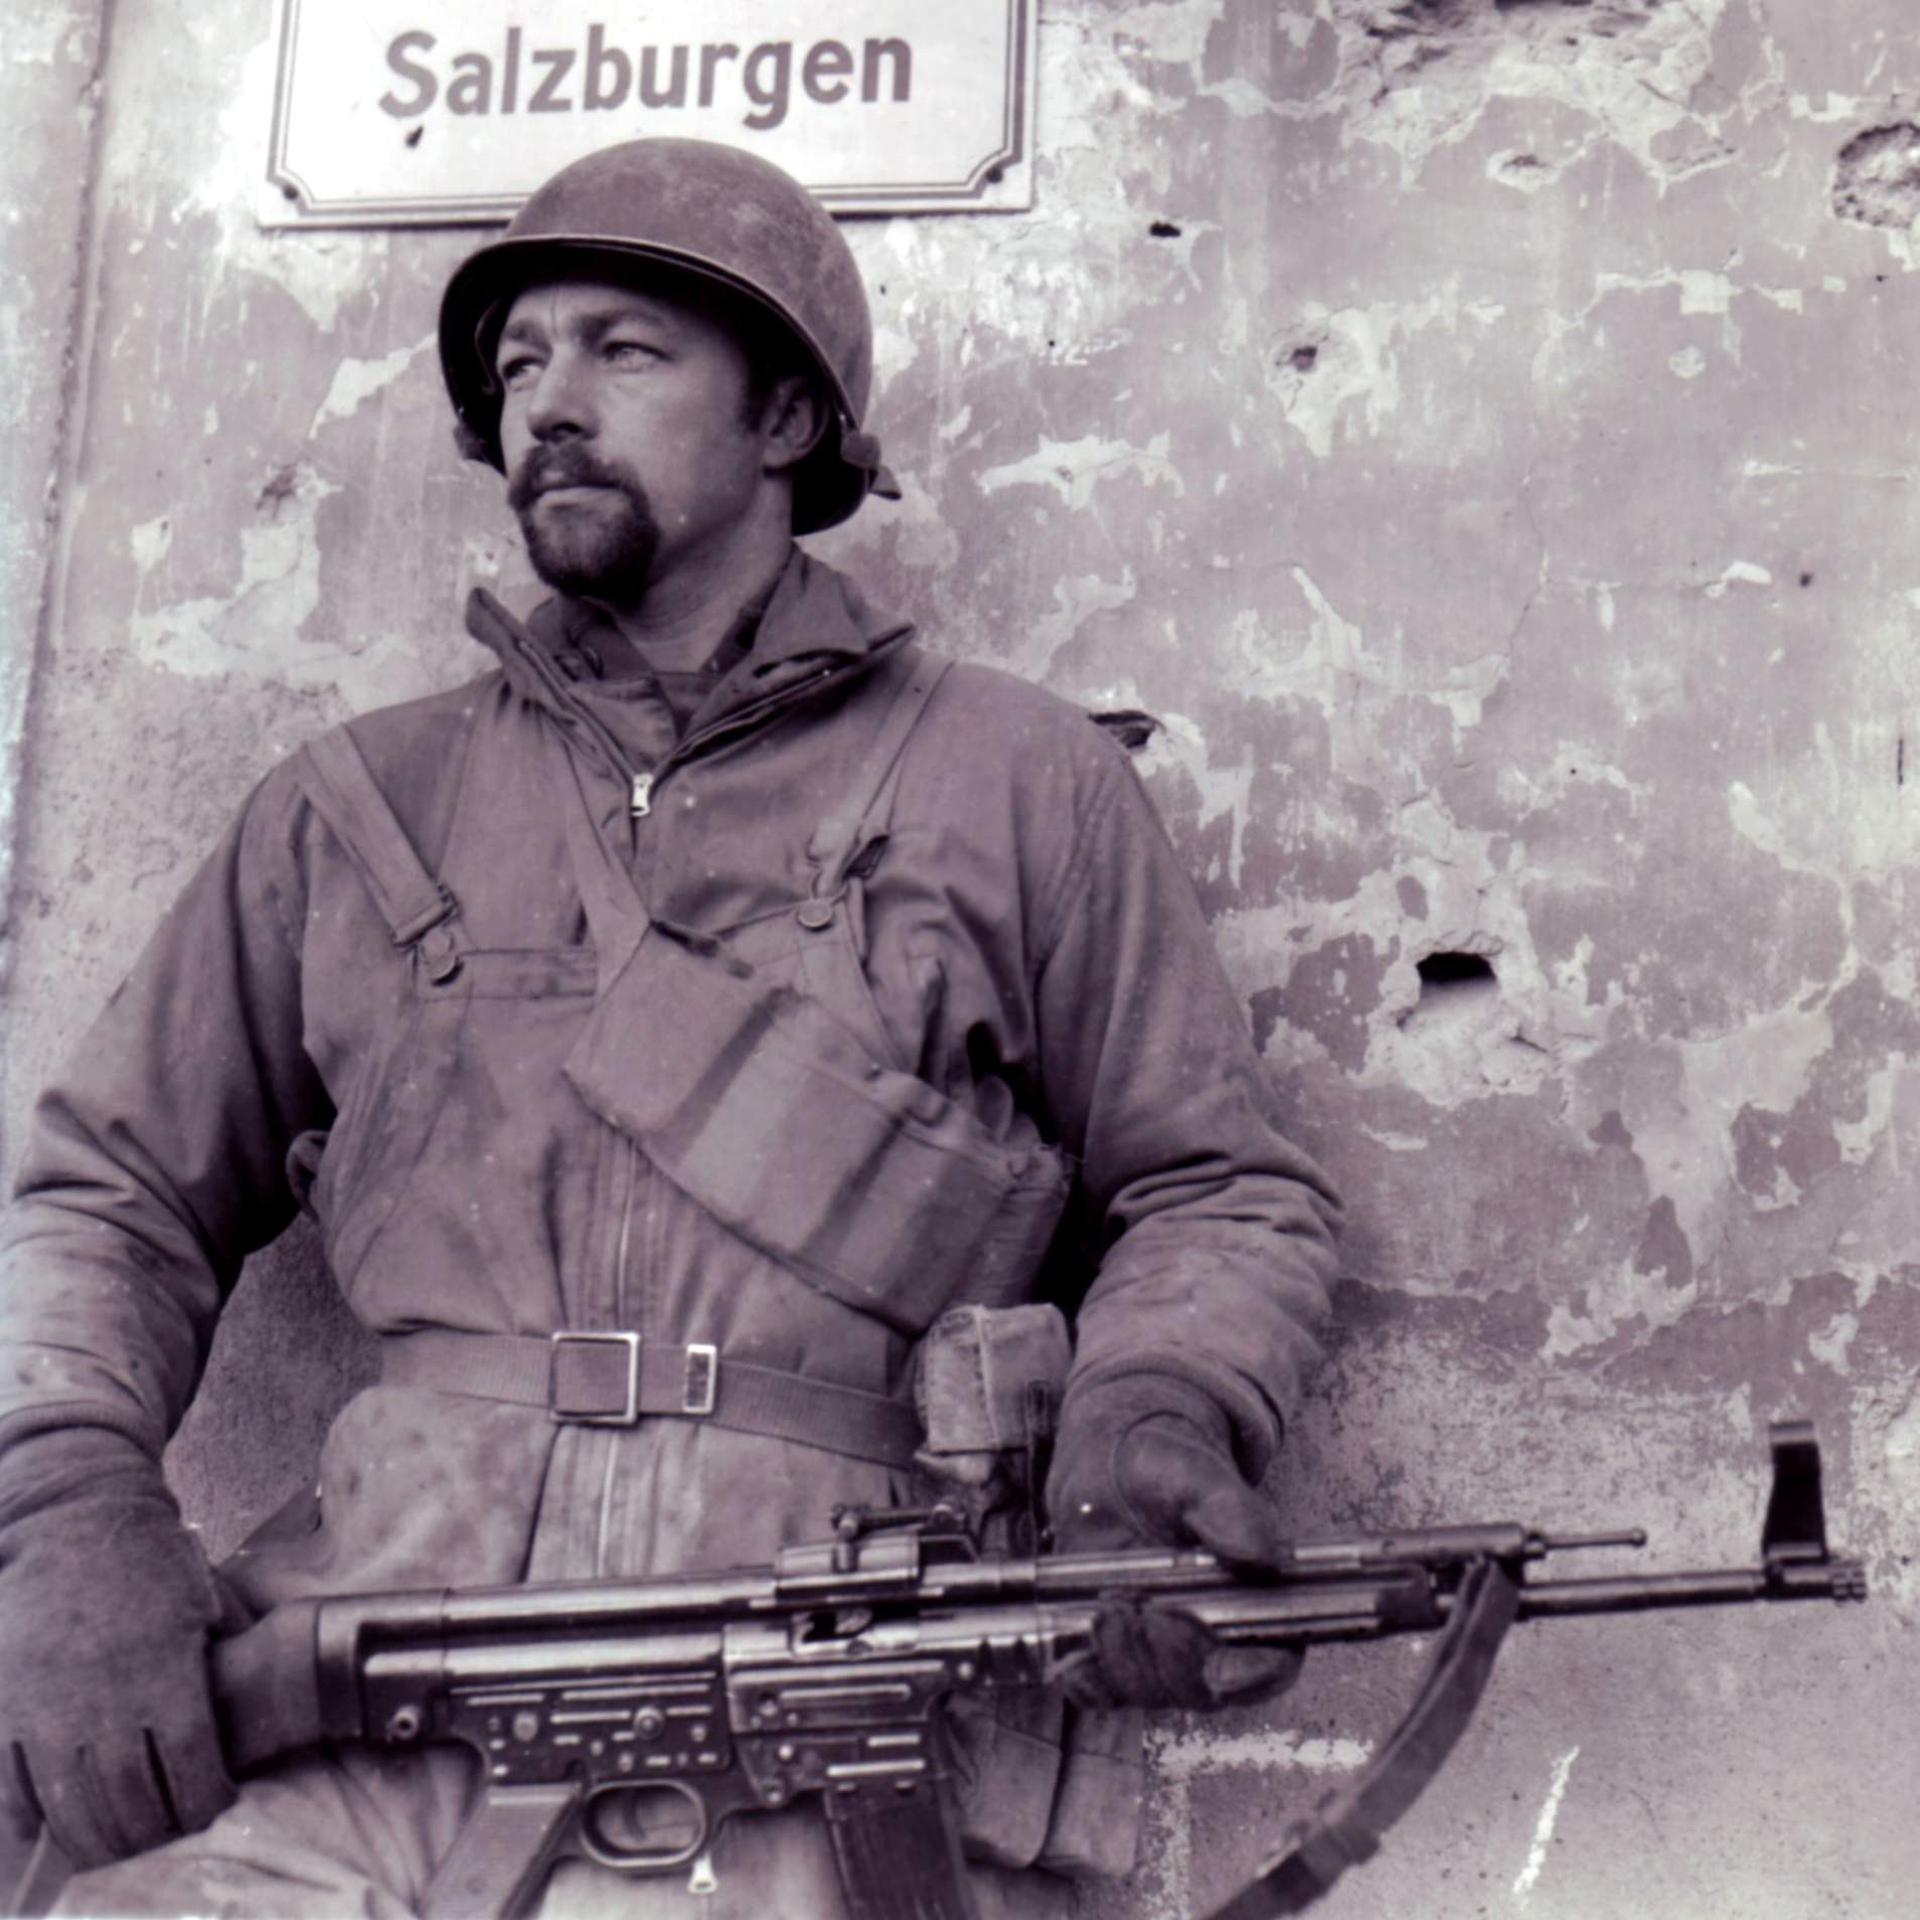 Some GIs took on the StG44 as their personal weapon—note the German magazine pouches hanging from this soldier’s belt. Chateau-Salin, France, November 13, 1944.